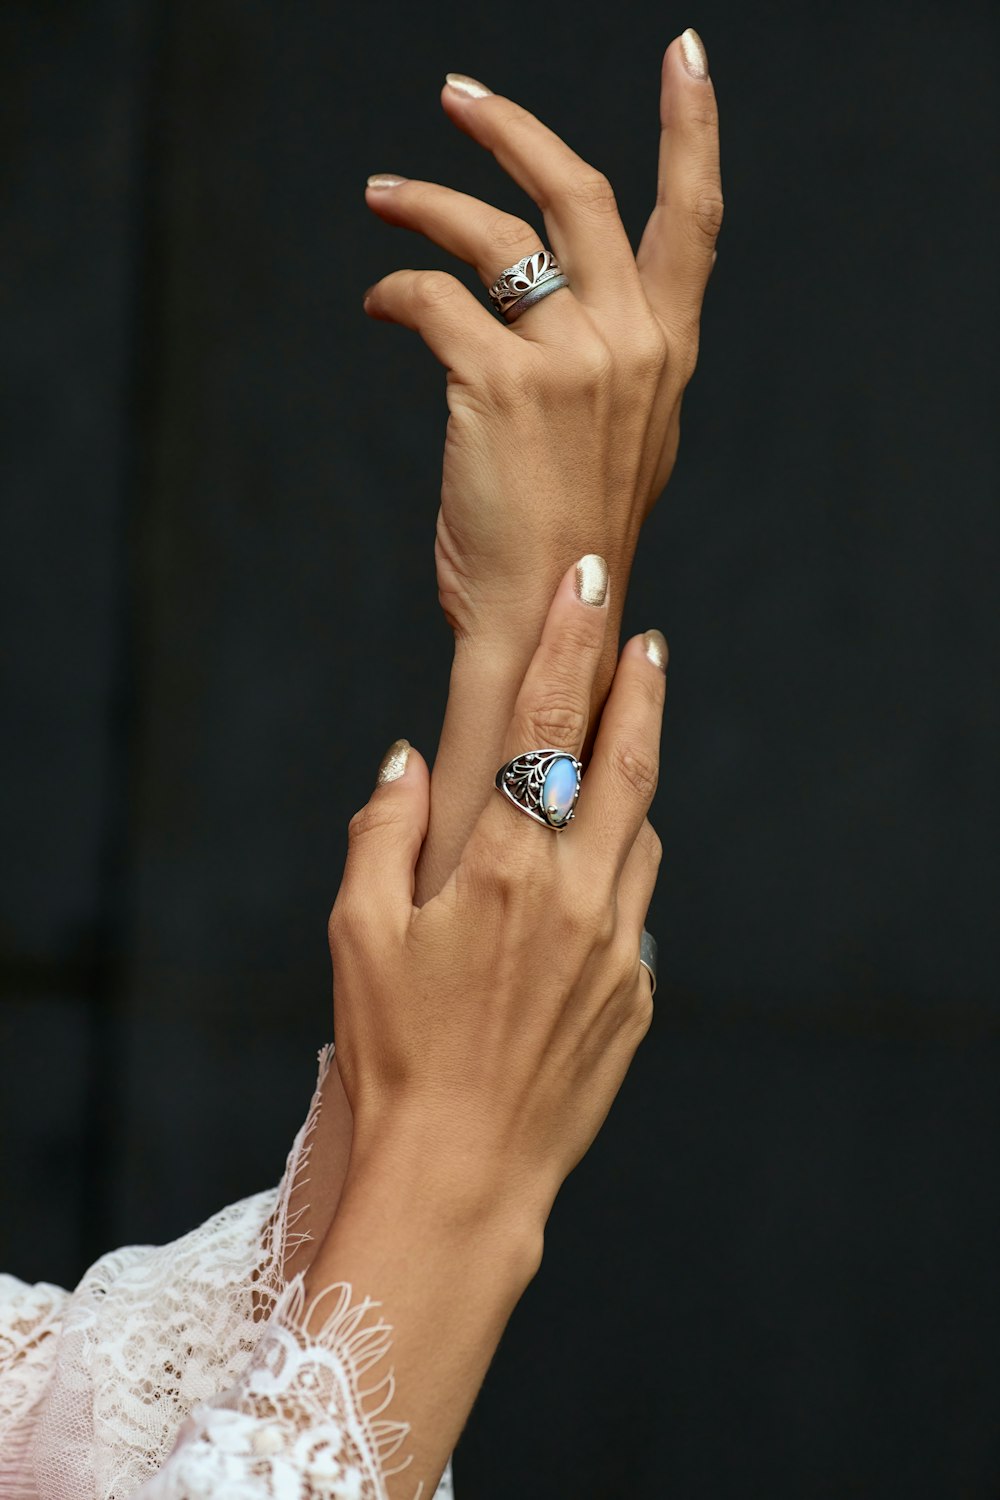 a close up of a person's hands holding a ring